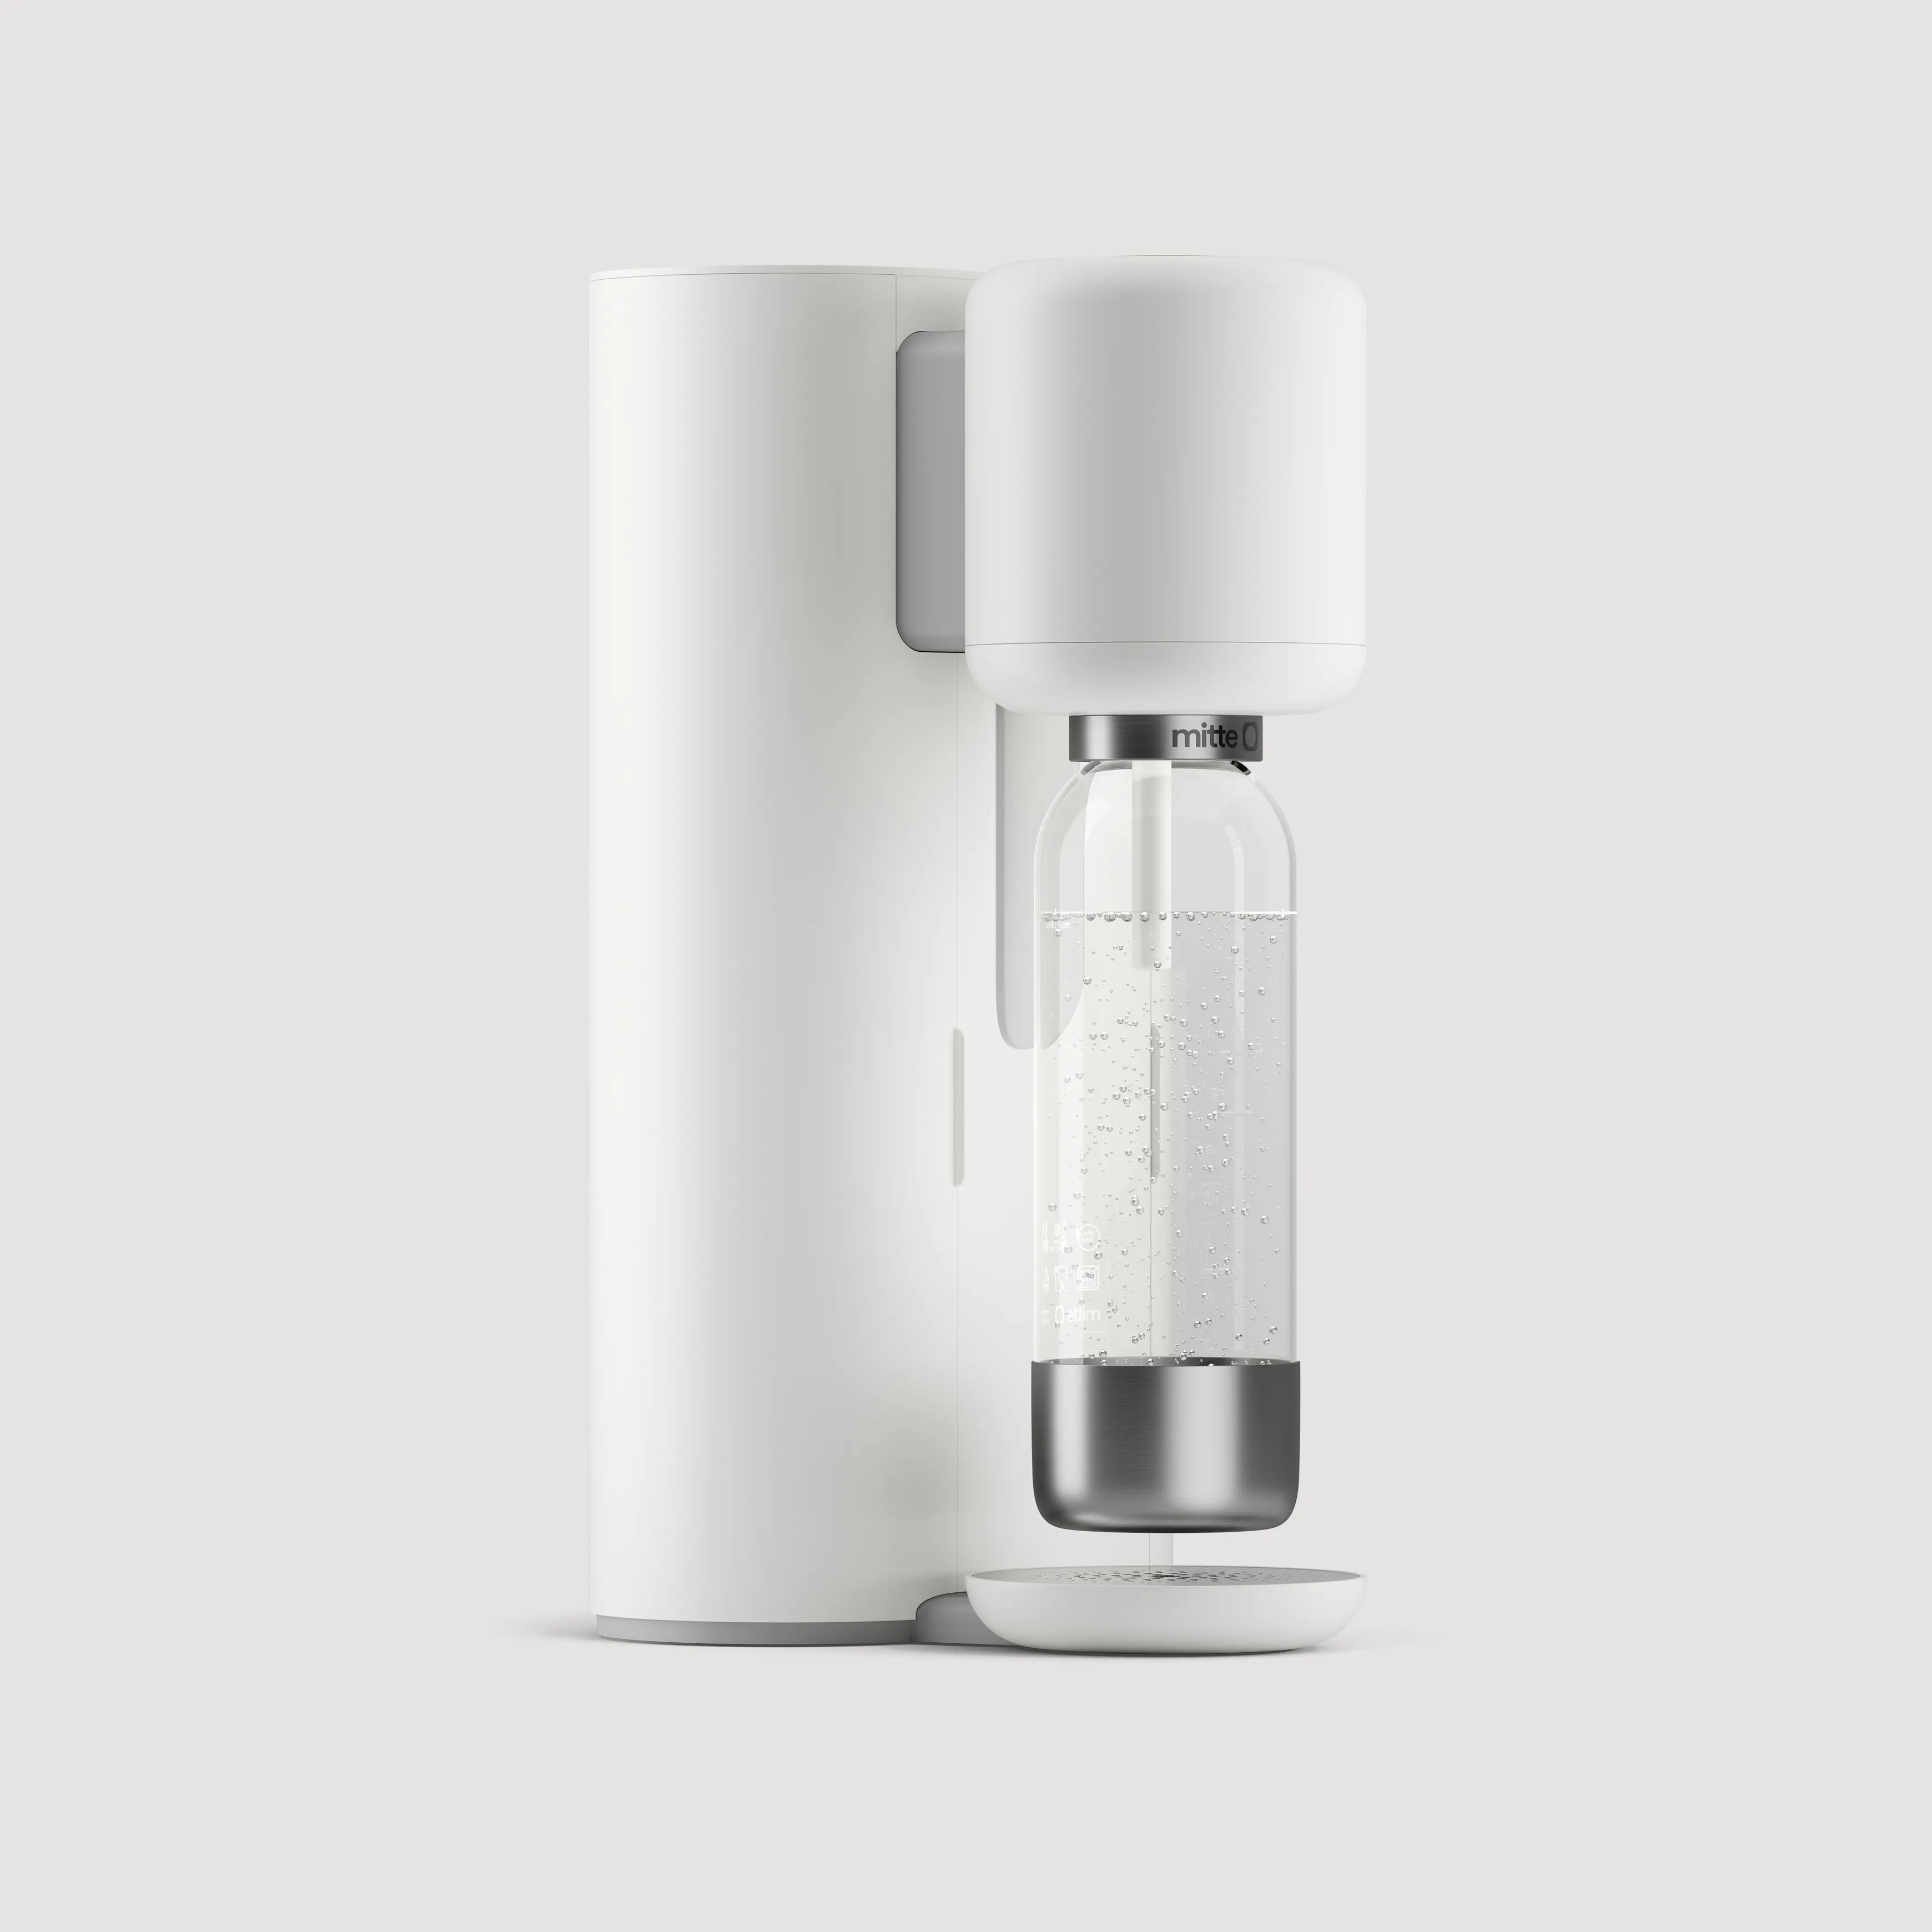 Side view of the Mitte water purifier